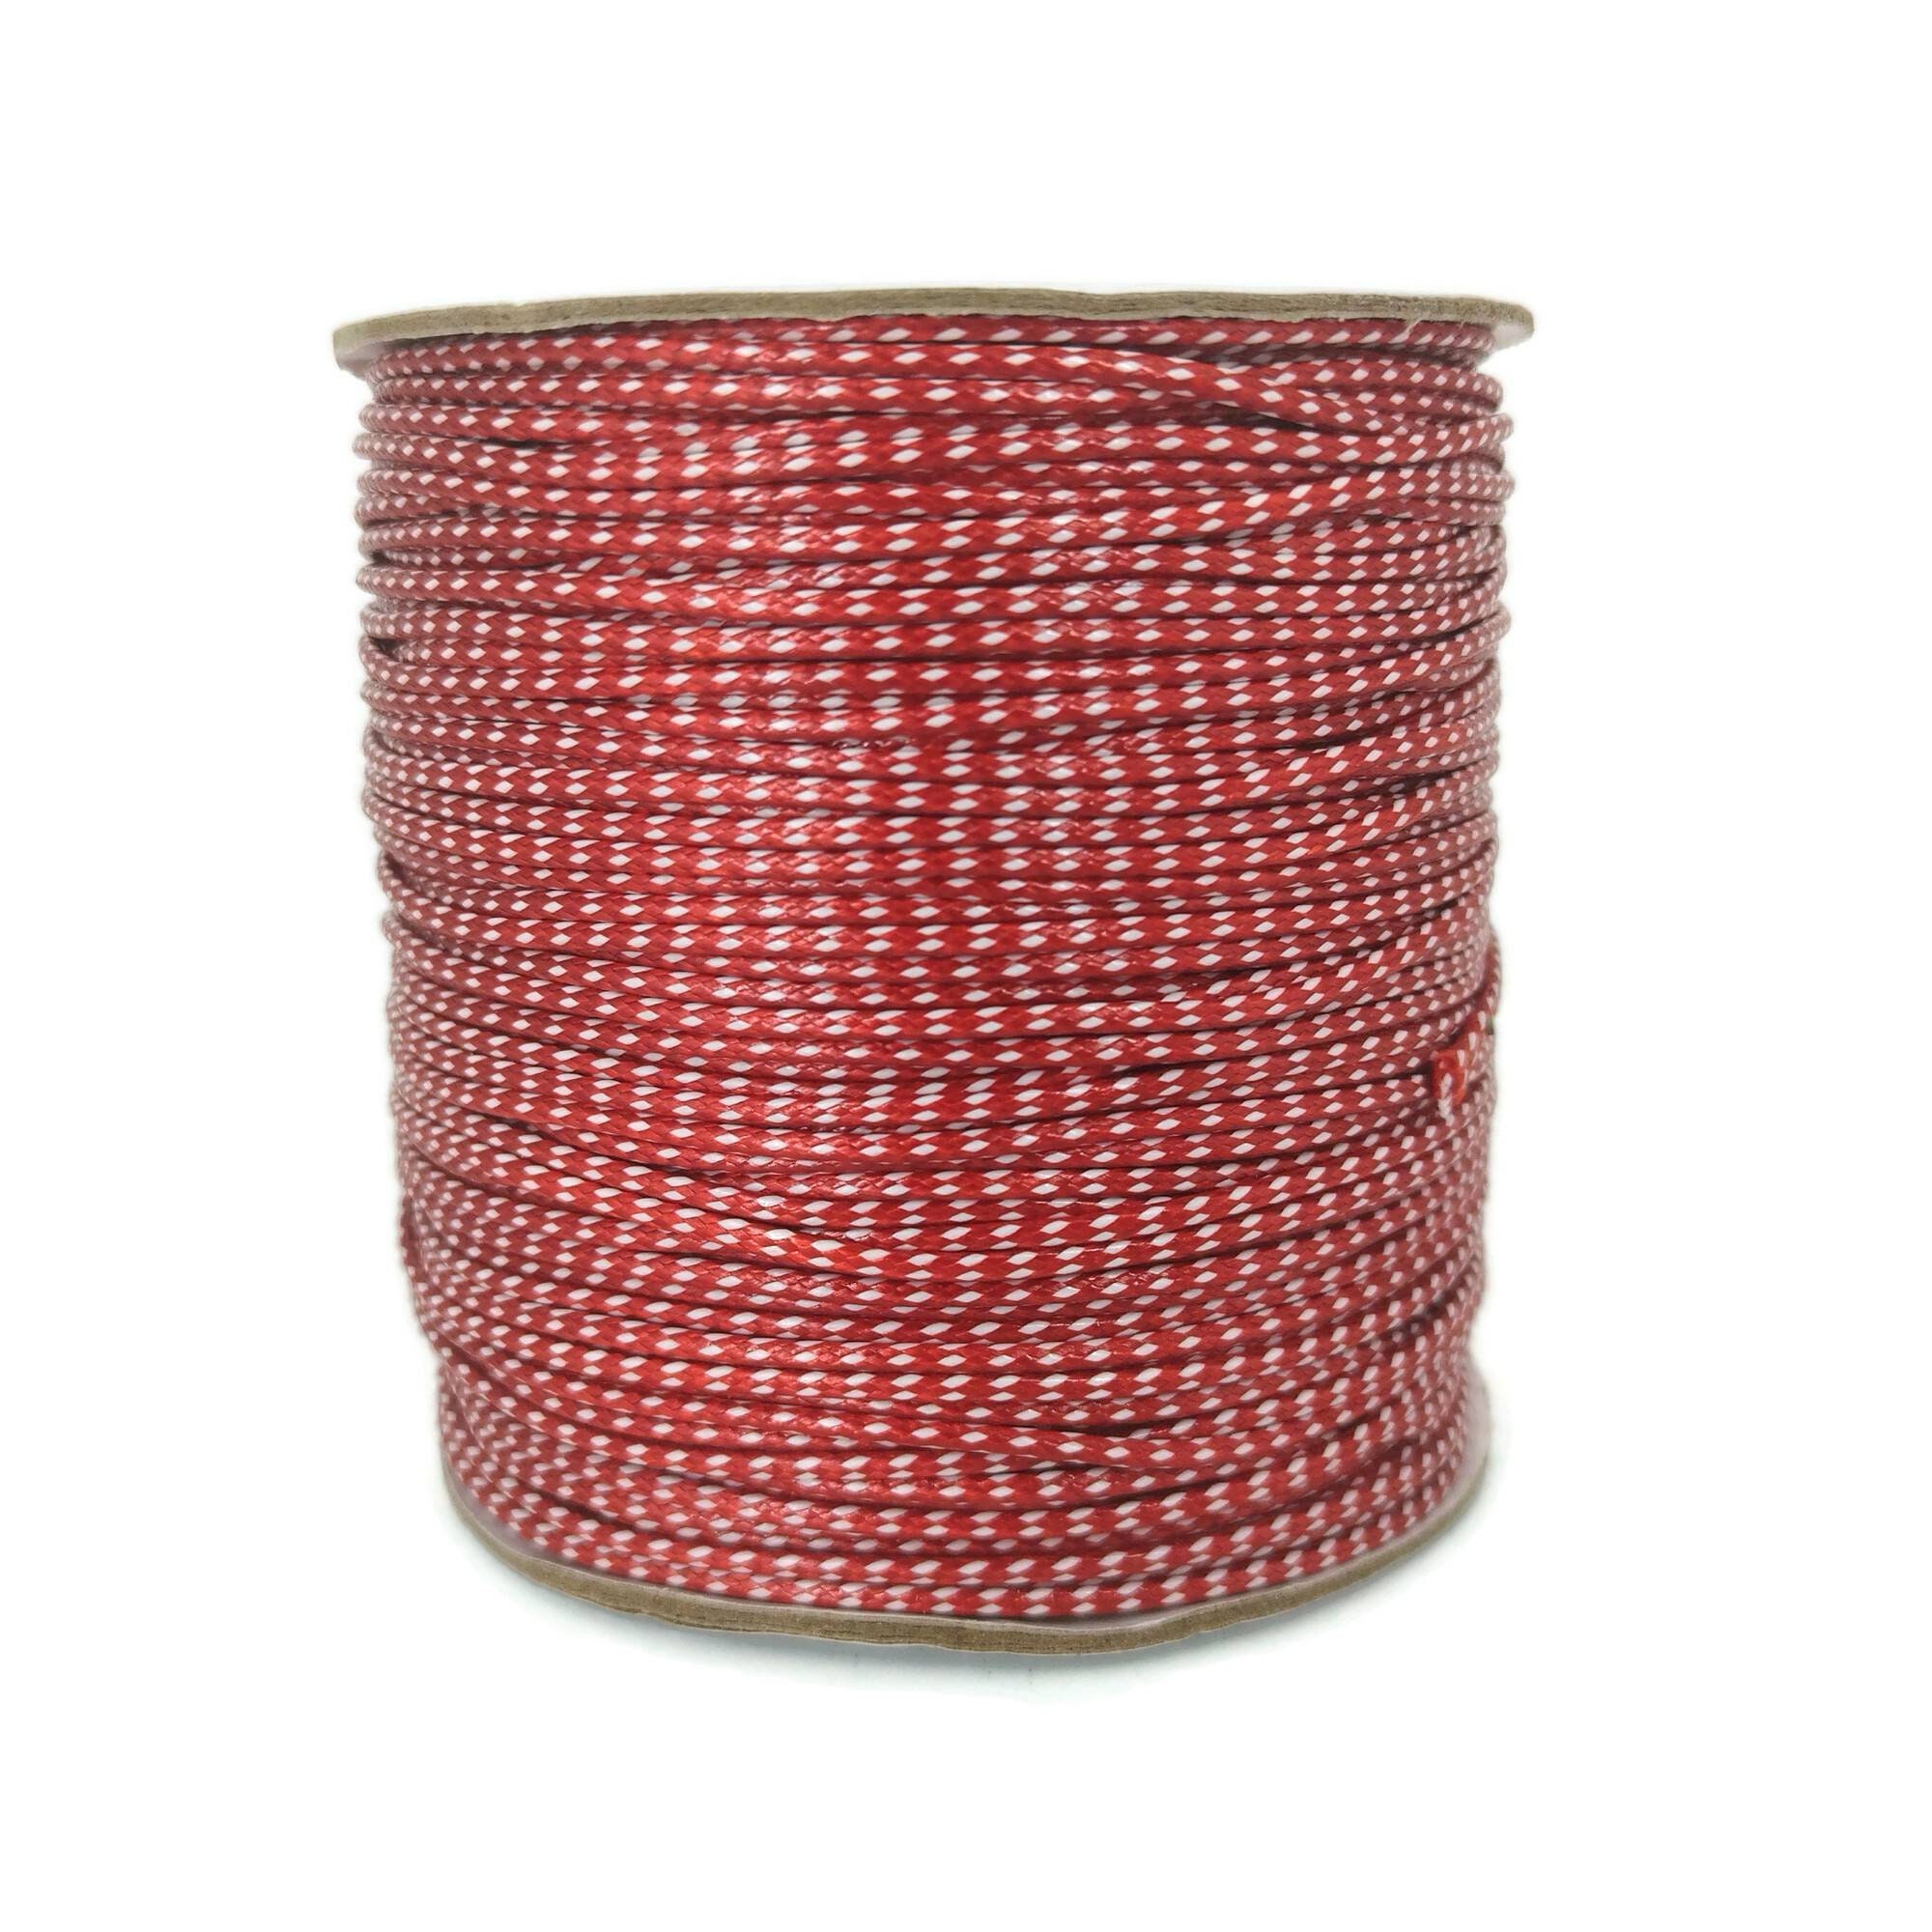 10yards Wax Cord,1.5mm Aerugo Waxed String,multi Color Waxed Polyester  Thread,bracelet Necklace Making,leather String Cord Supply W129 